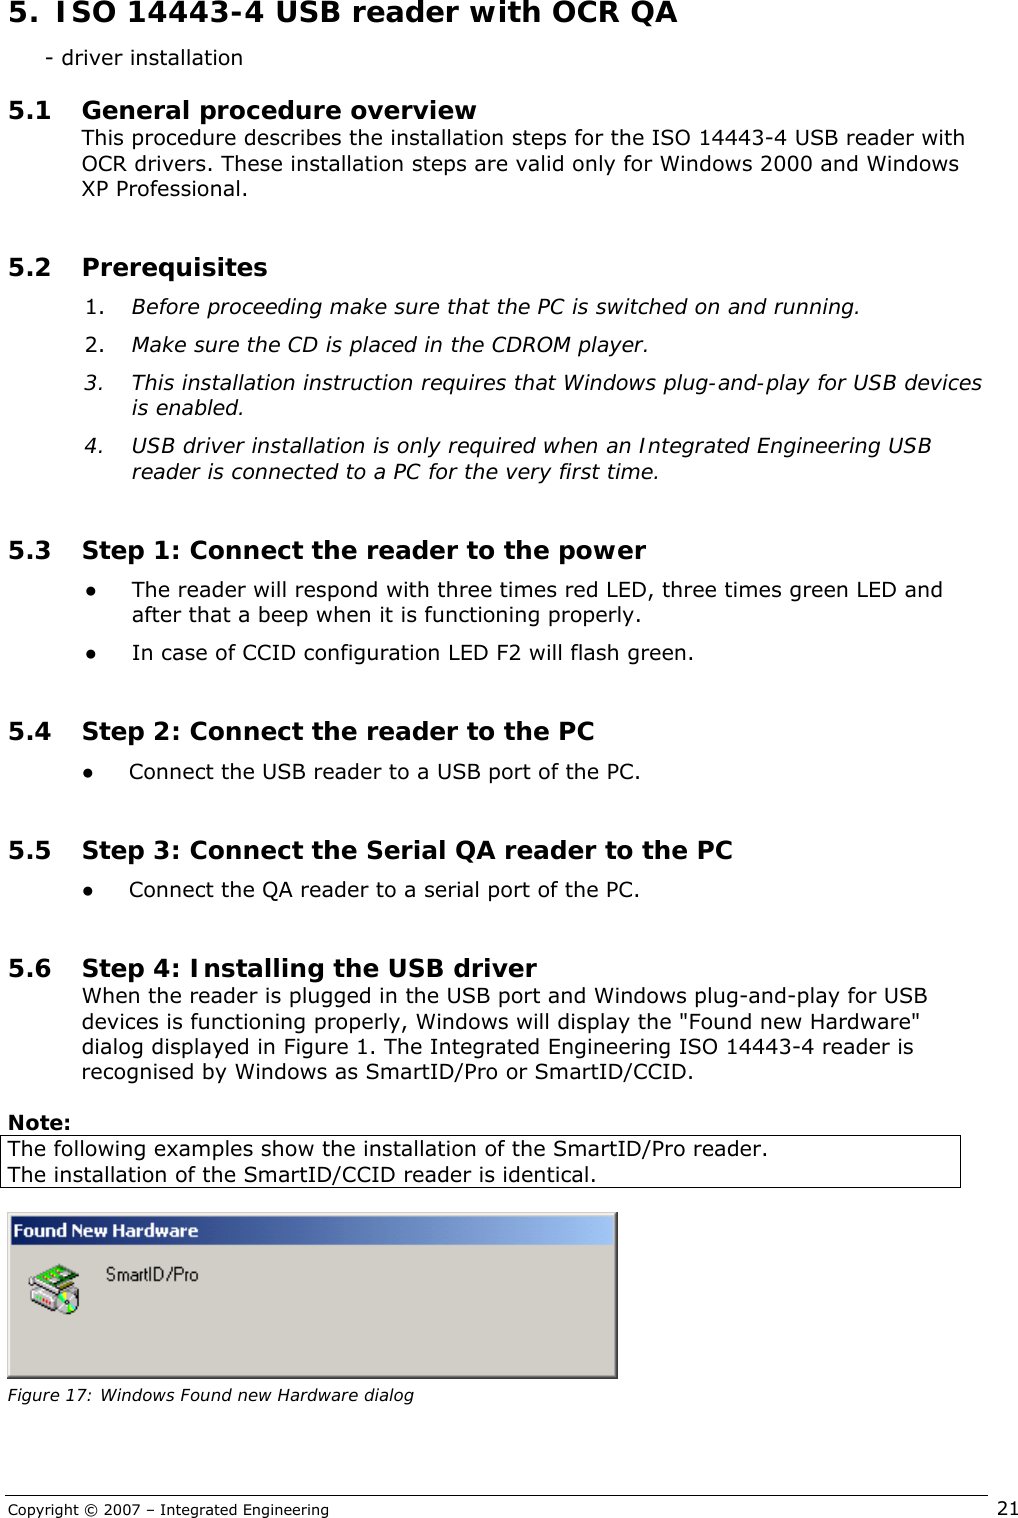 Copyright © 2007 – Integrated Engineering   21      - driver installation 5.1 General procedure overview This procedure describes the installation steps for the ISO 14443-4 USB reader with OCR drivers. These installation steps are valid only for Windows 2000 and Windows XP Professional.  5.2 Prerequisites 1. Before proceeding make sure that the PC is switched on and running.  2. Make sure the CD is placed in the CDROM player. 3. This installation instruction requires that Windows plug-and-play for USB devices is enabled. 4. USB driver installation is only required when an Integrated Engineering USB reader is connected to a PC for the very first time.  5.3 Step 1: Connect the reader to the power ● The reader will respond with three times red LED, three times green LED and after that a beep when it is functioning properly. ● In case of CCID configuration LED F2 will flash green.  5.4 Step 2: Connect the reader to the PC ● Connect the USB reader to a USB port of the PC.   5.5 Step 3: Connect the Serial QA reader to the PC ● Connect the QA reader to a serial port of the PC.   5.6 Step 4: Installing the USB driver When the reader is plugged in the USB port and Windows plug-and-play for USB devices is functioning properly, Windows will display the &quot;Found new Hardware&quot; dialog displayed in Figure 1. The Integrated Engineering ISO 14443-4 reader is recognised by Windows as SmartID/Pro or SmartID/CCID.  Note: The following examples show the installation of the SmartID/Pro reader. The installation of the SmartID/CCID reader is identical.   Figure 17: Windows Found new Hardware dialog 5.  ISO 14443-4 USB reader with OCR QA  